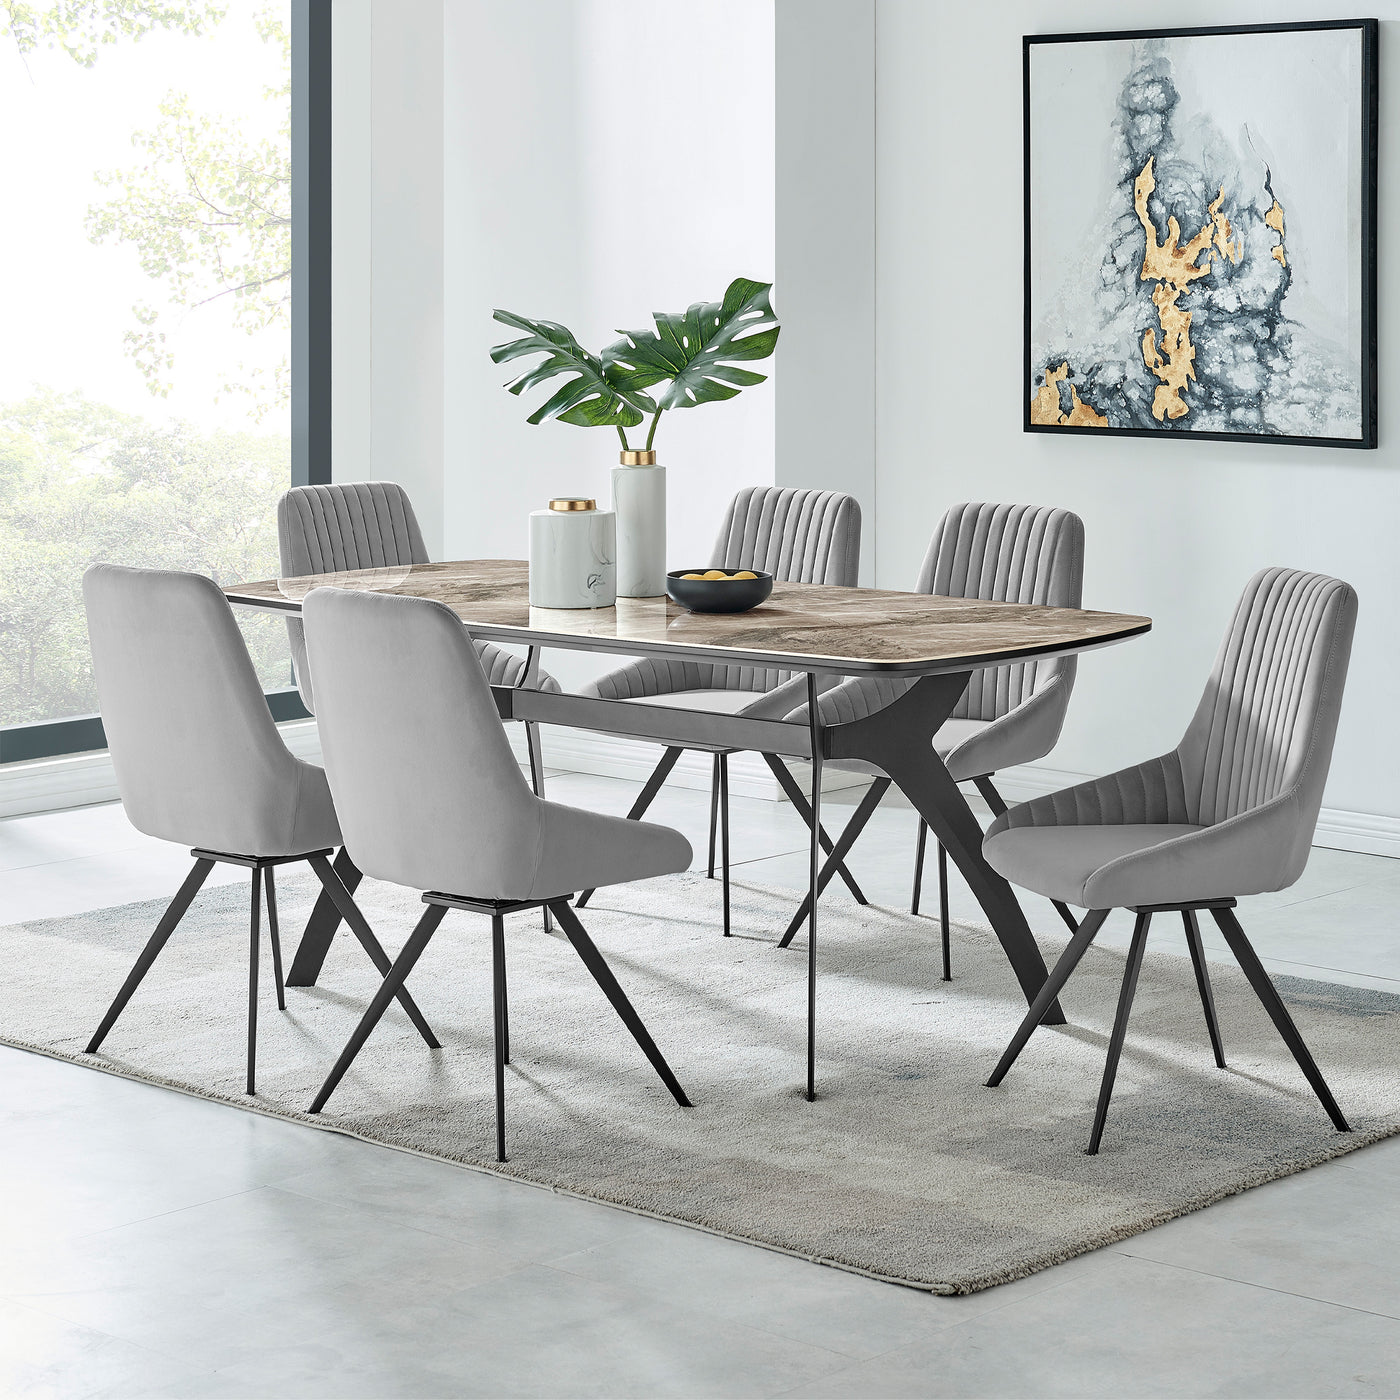 Andes/Alison Dining Set